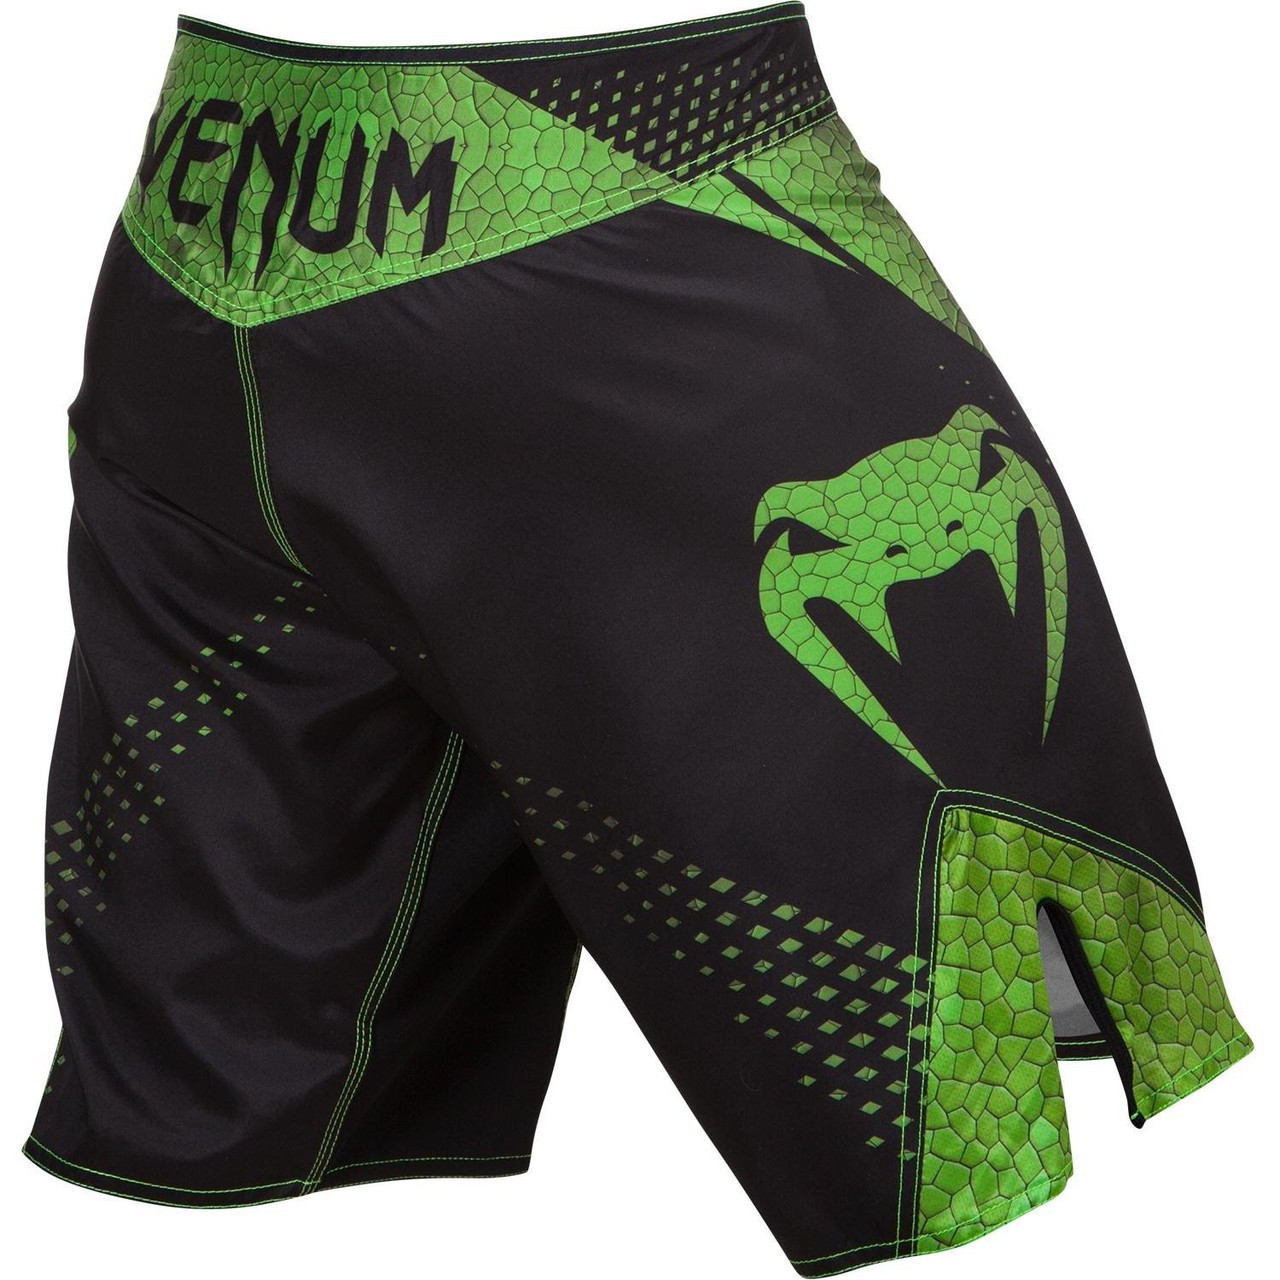 Back view of the Venum Hurricane Fightshorts Amazonia Green MMA Shorts now available at www.thejiujitsushop.com

Top MMA and Grappling Shorts

Enjoy Free Shipping from The Jiu Jitsu Shop today! 